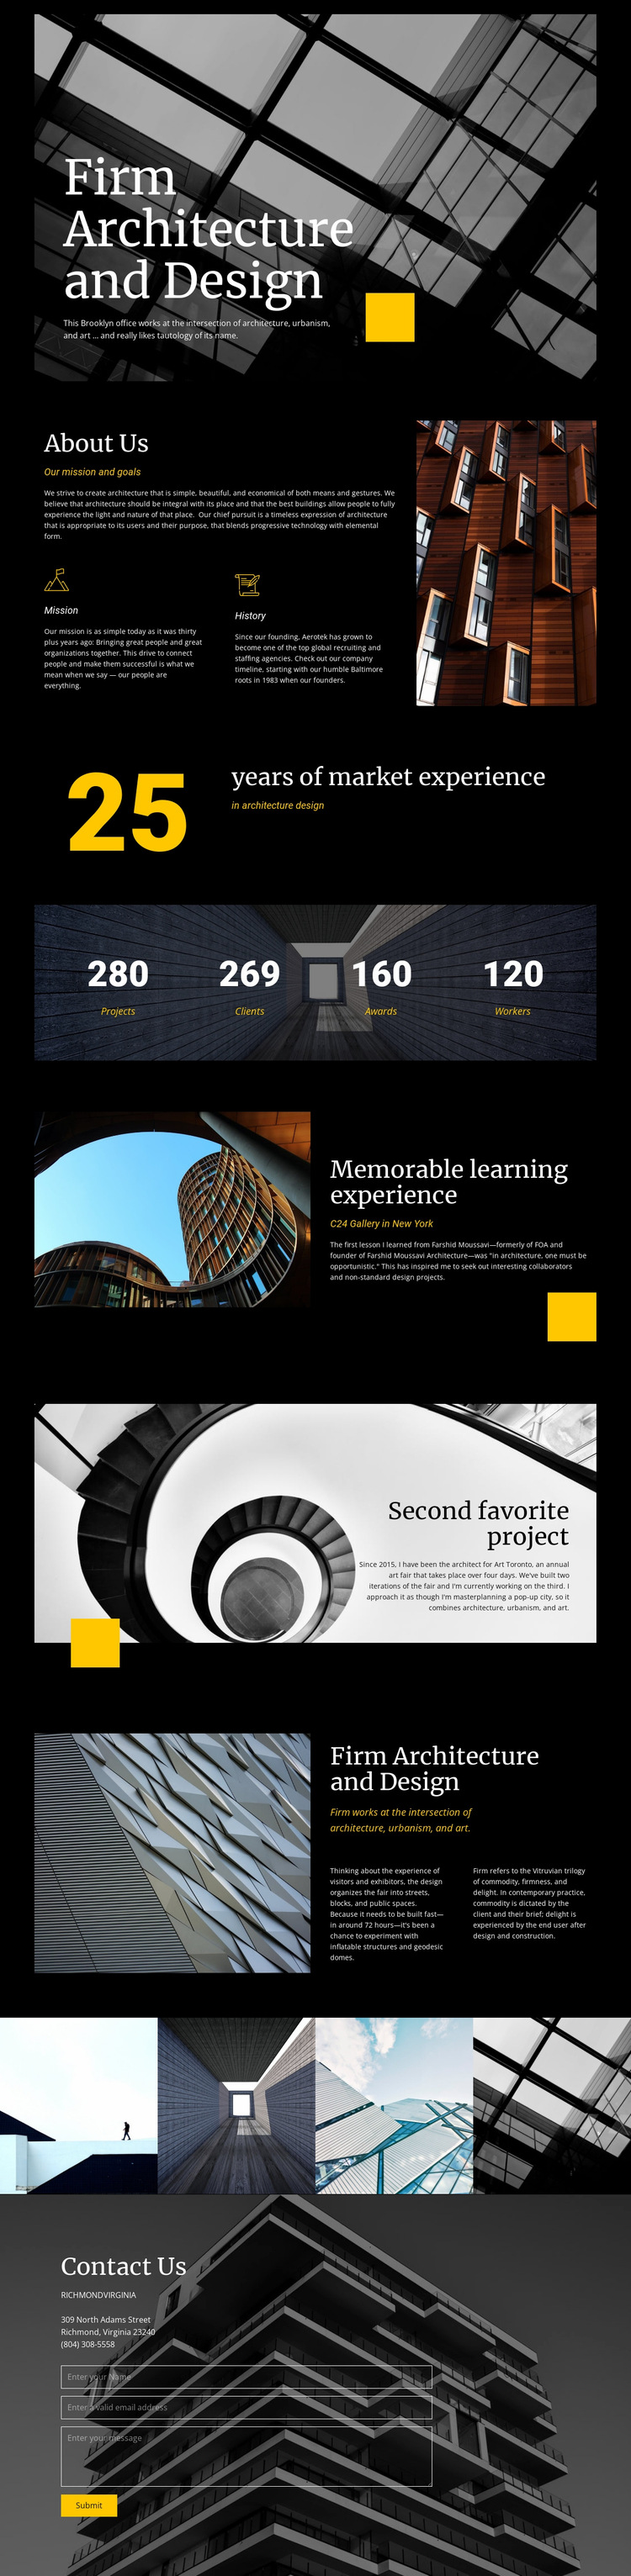 Firm architecture and Design Website Builder Templates